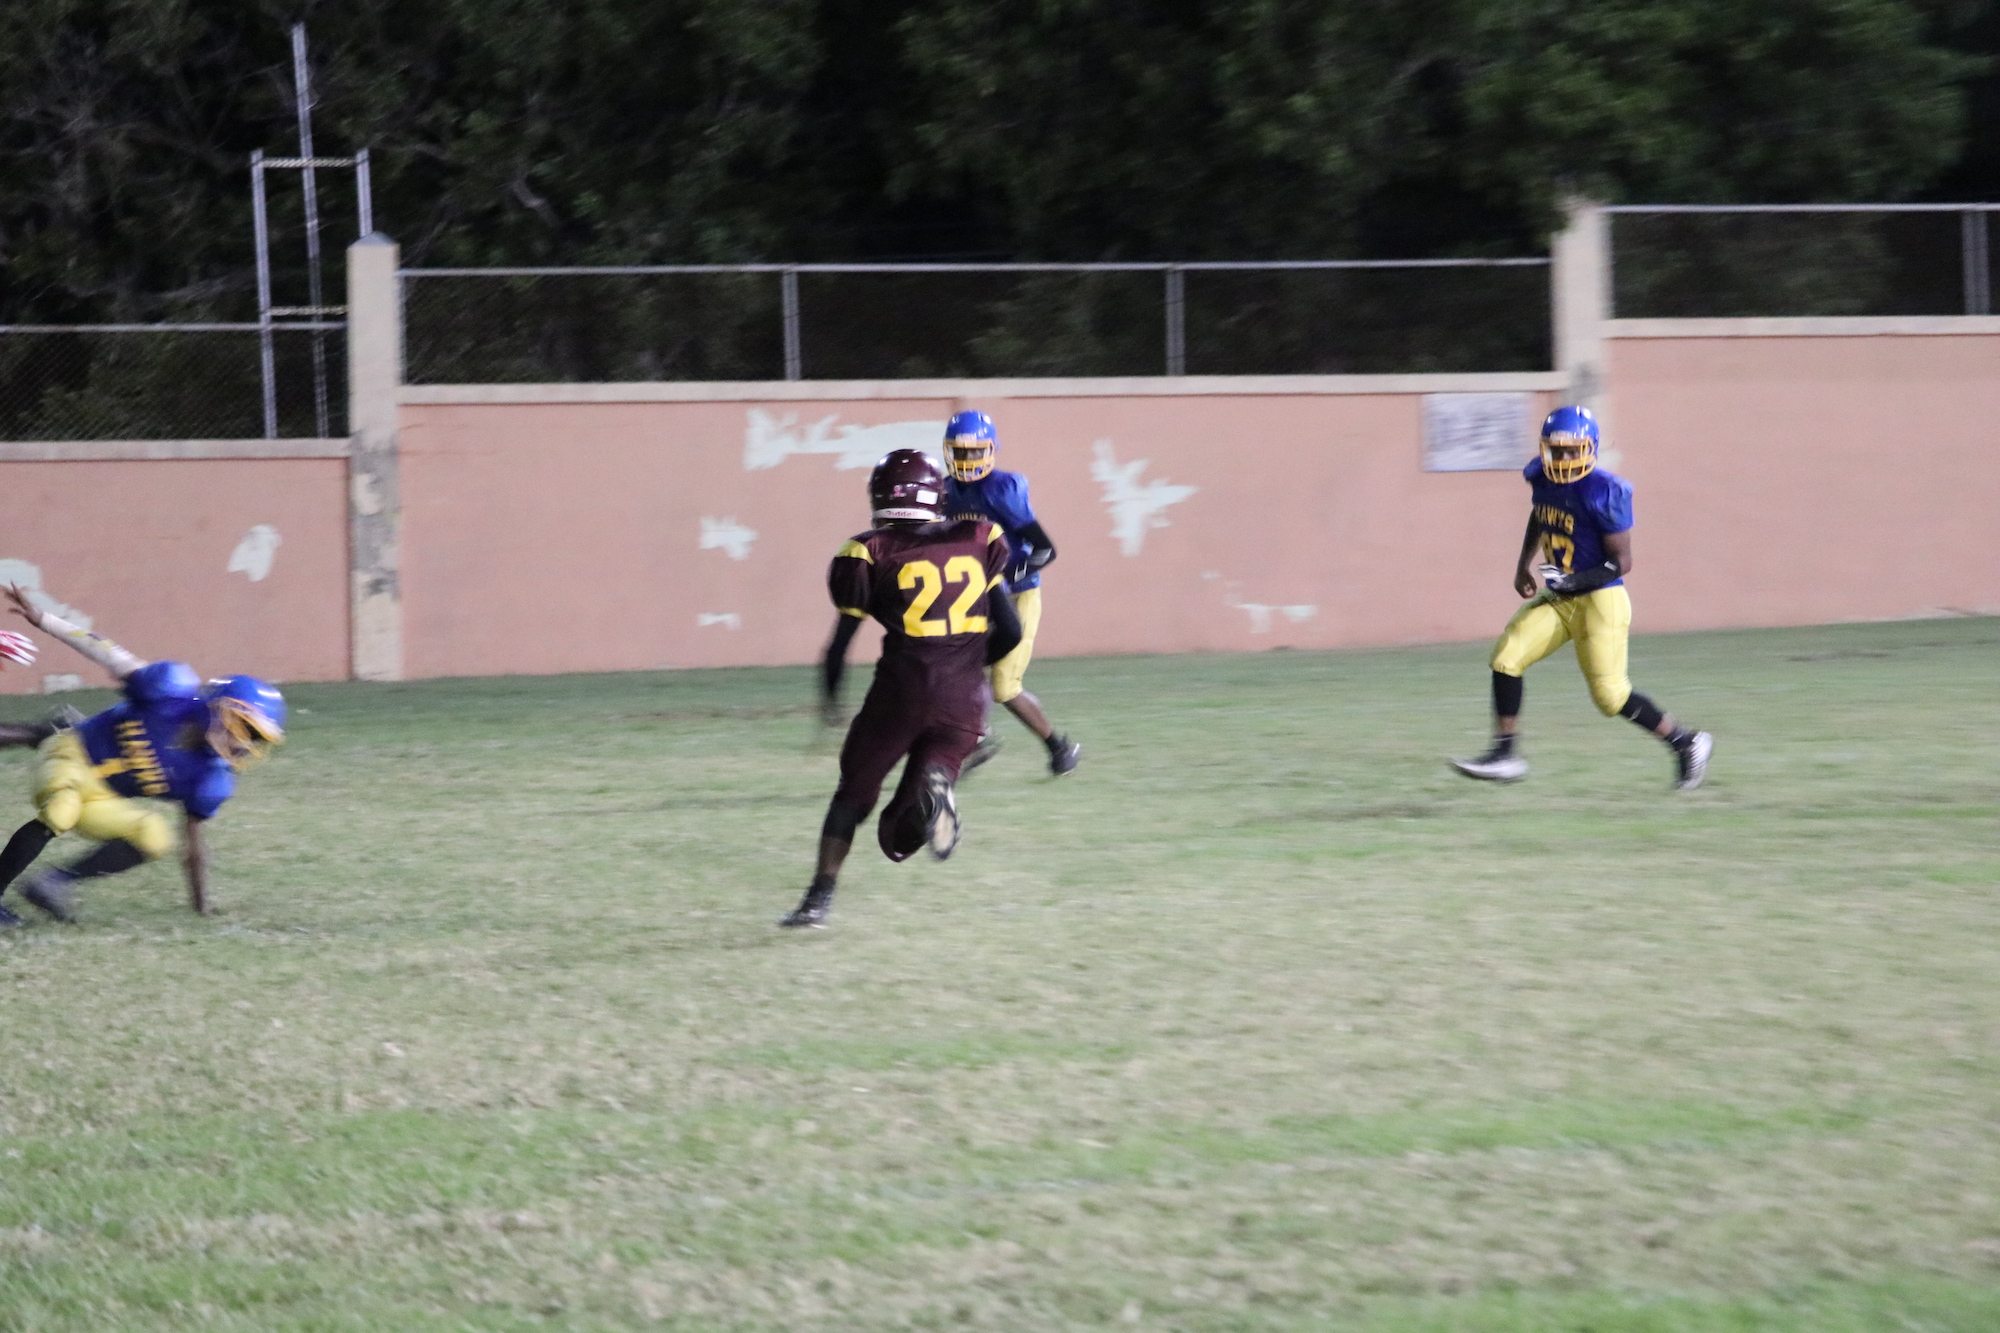 1923] Rays for the Win at the 2019-2020 Inter-Island Tackle Football  Championship, Public Relations